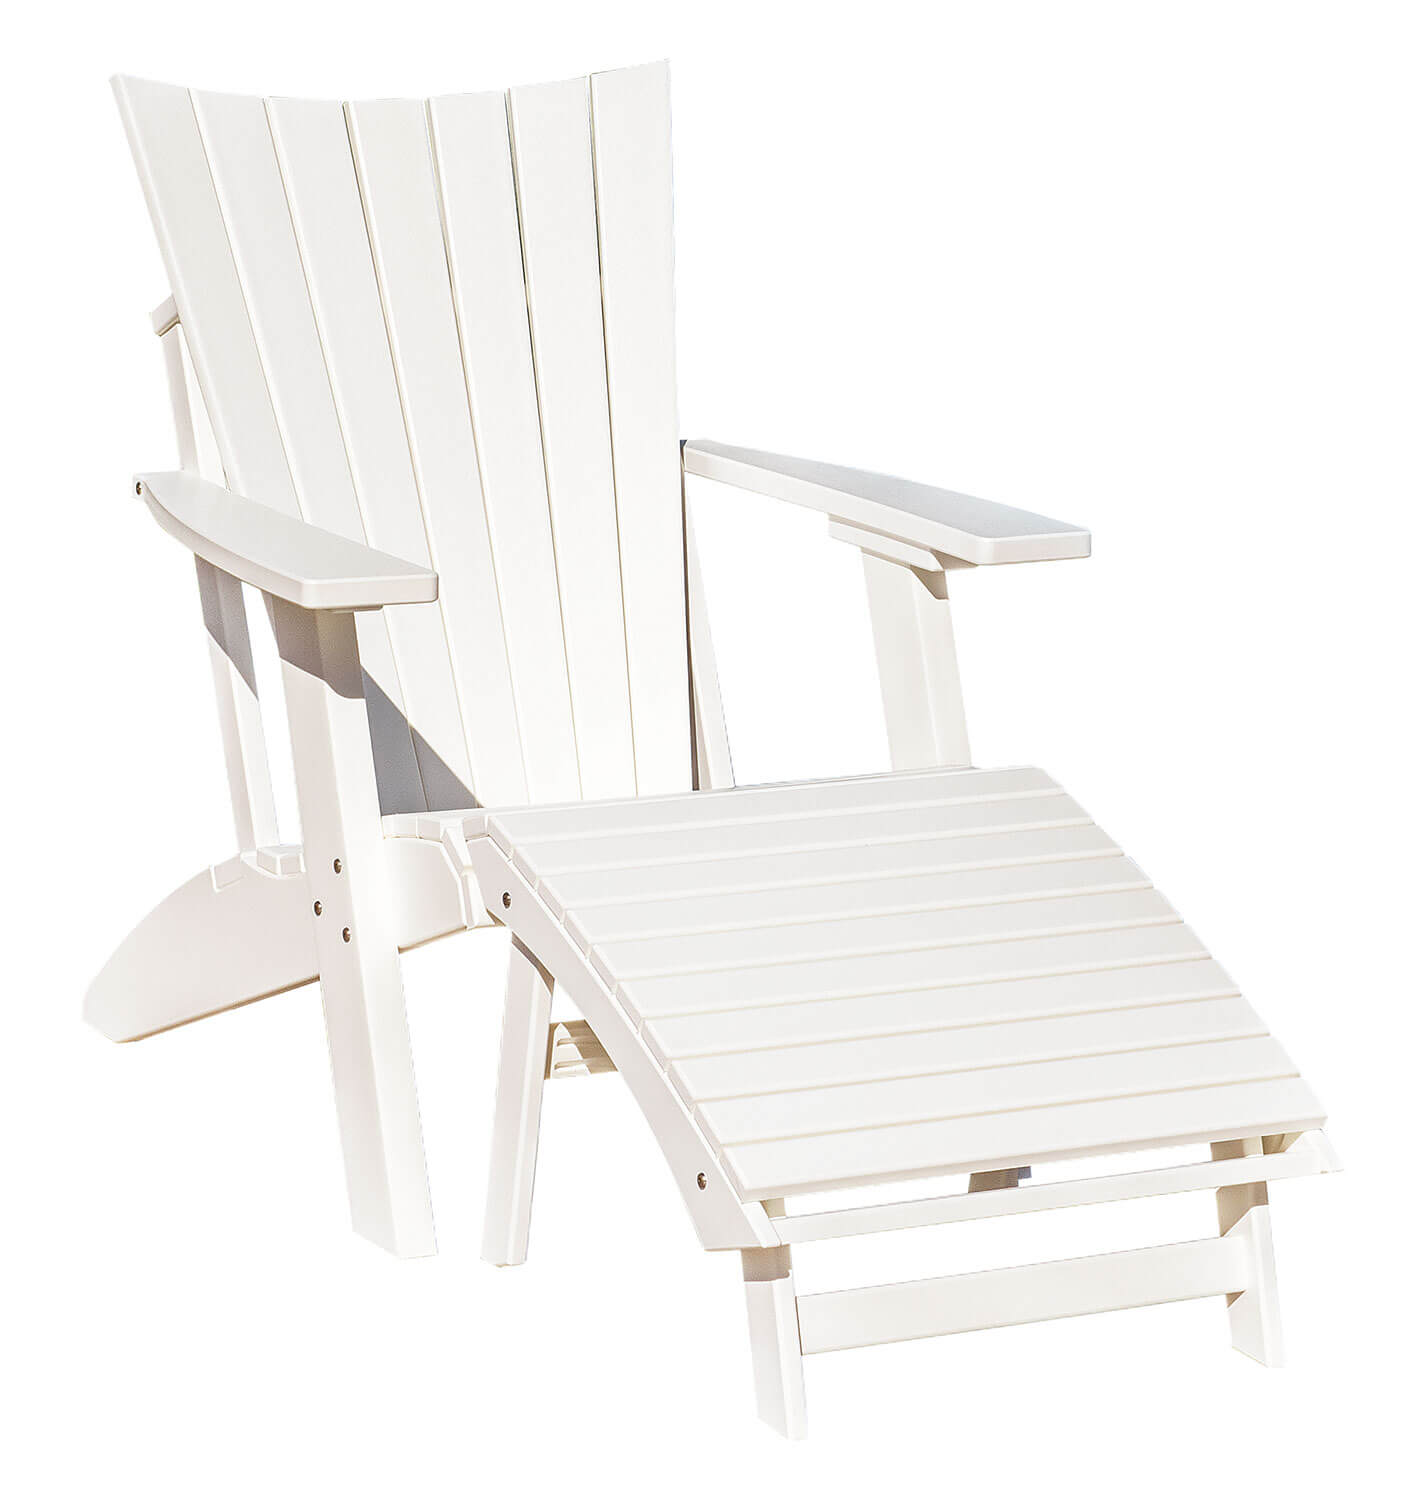 EC Woods Adirondack Outdoor Poly Adjustable Height Ottoman Up Shown in Bright White